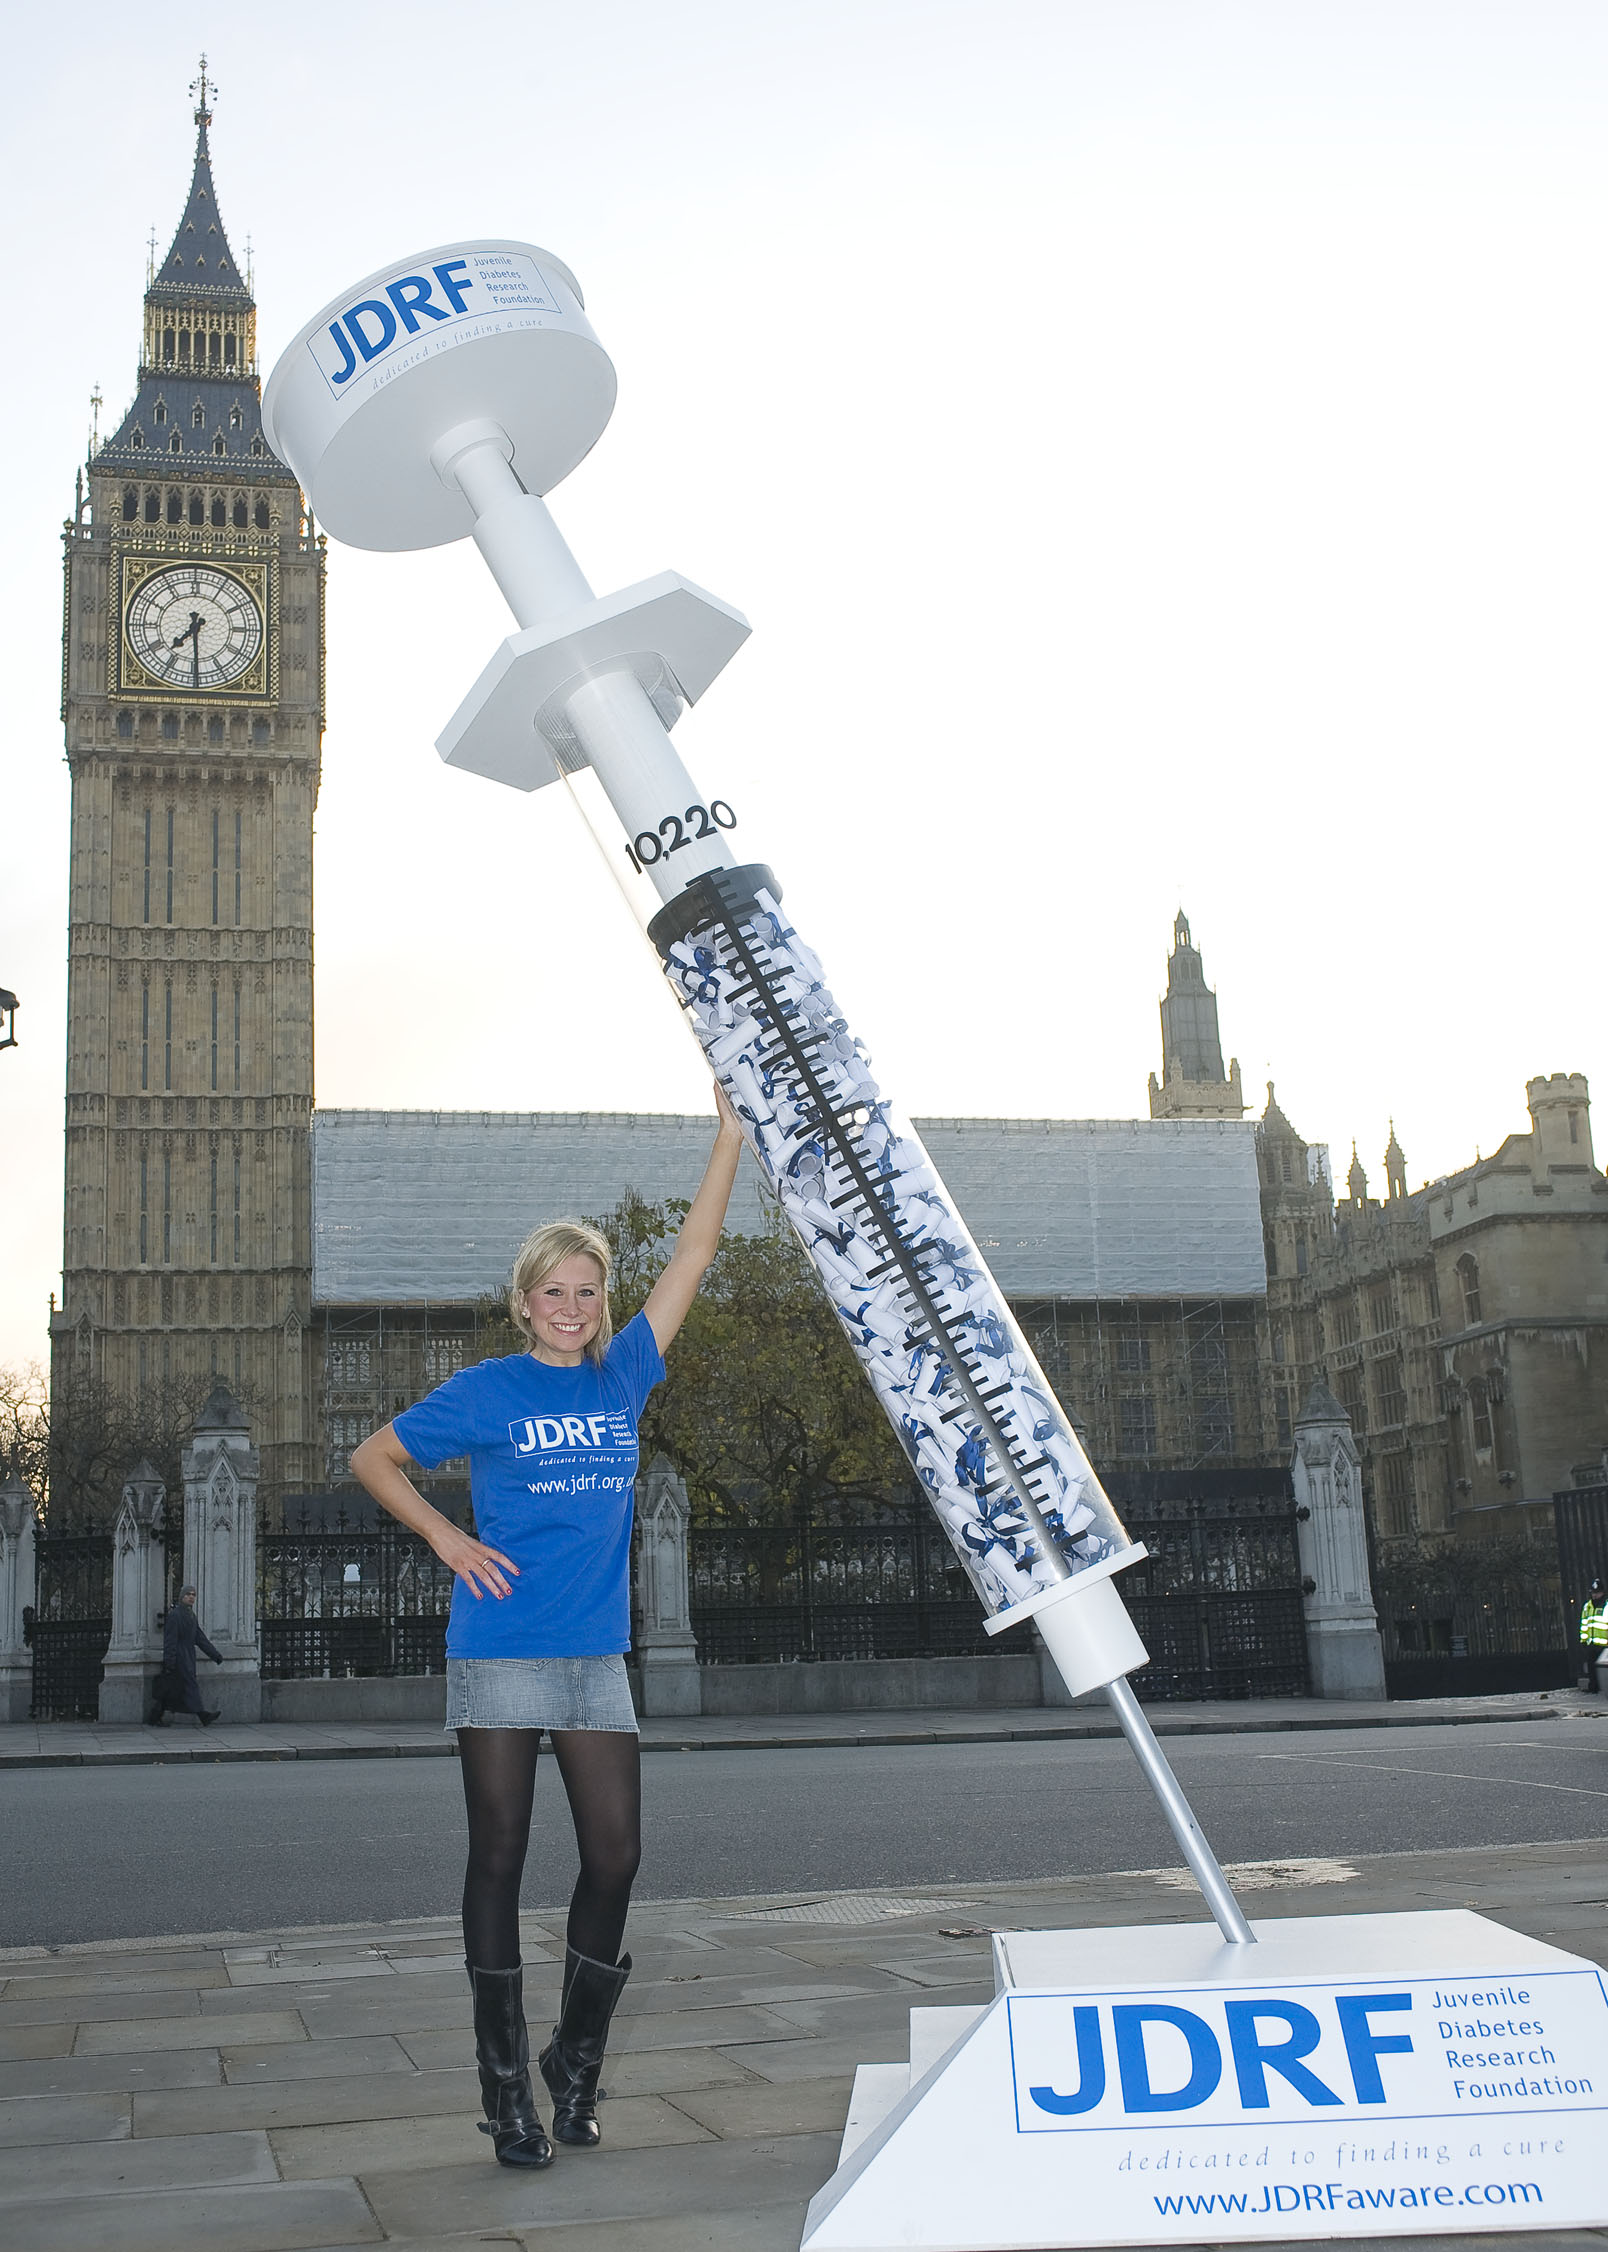 So here is the world's largest syringe on site in Parliament Square